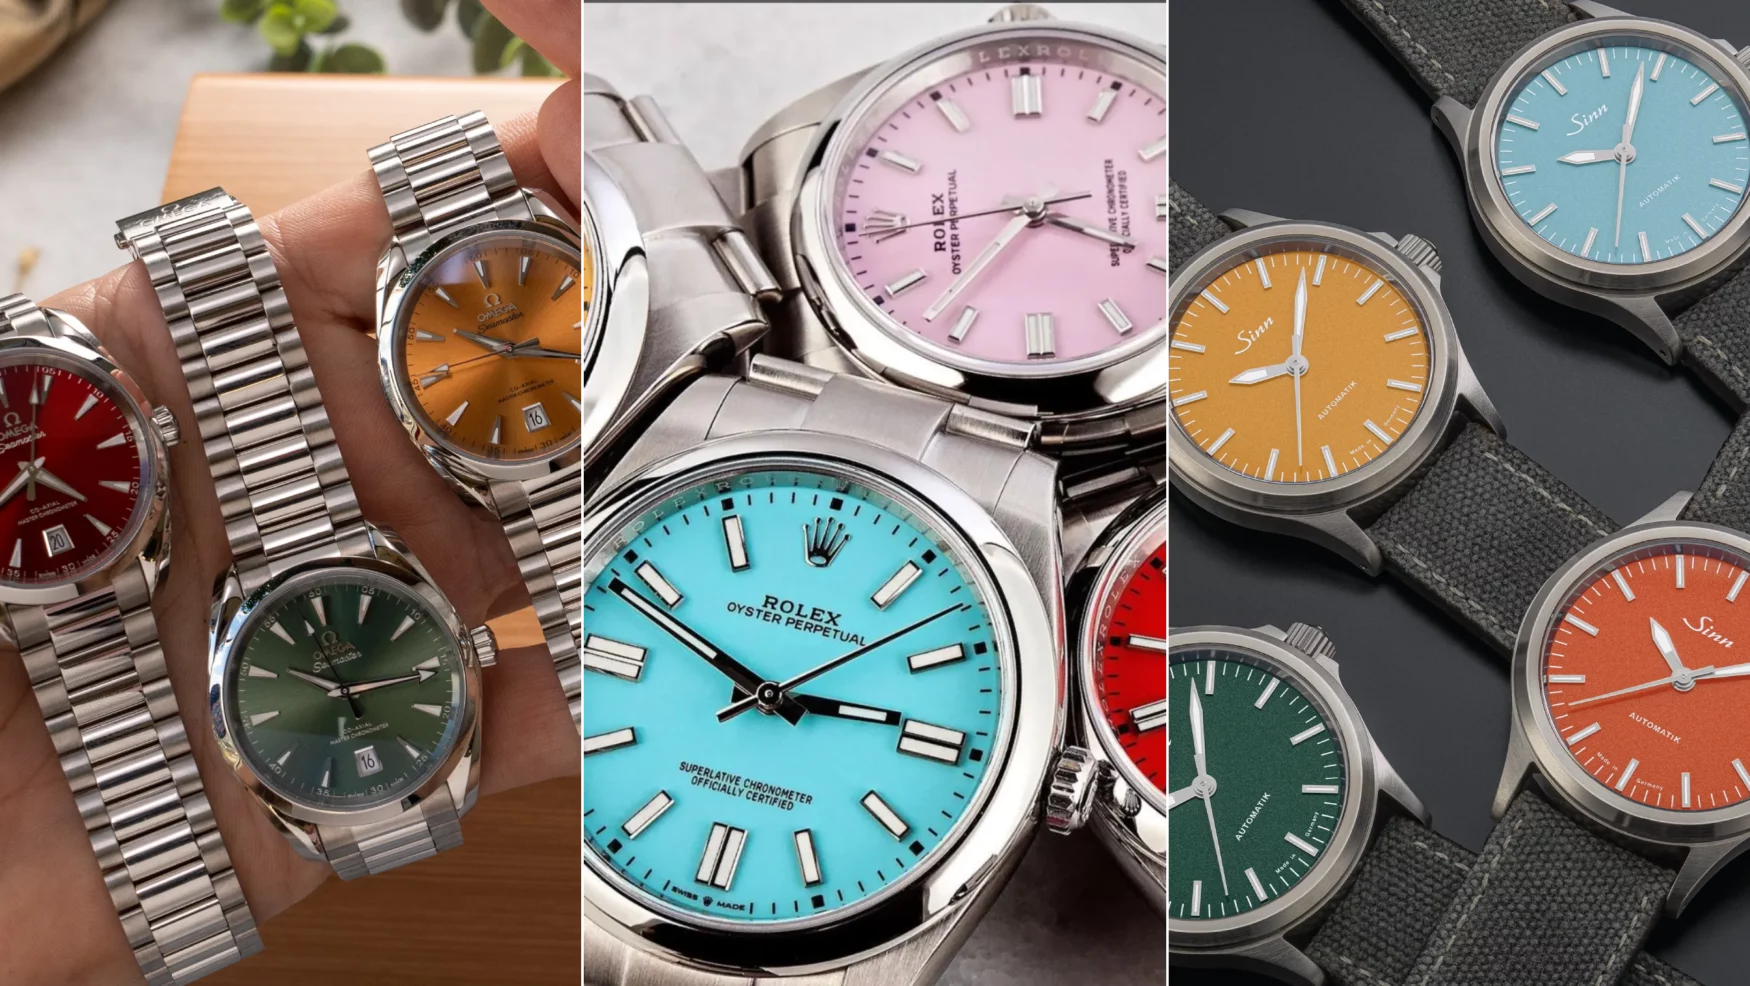 Why have colourful watches only recently become the norm?